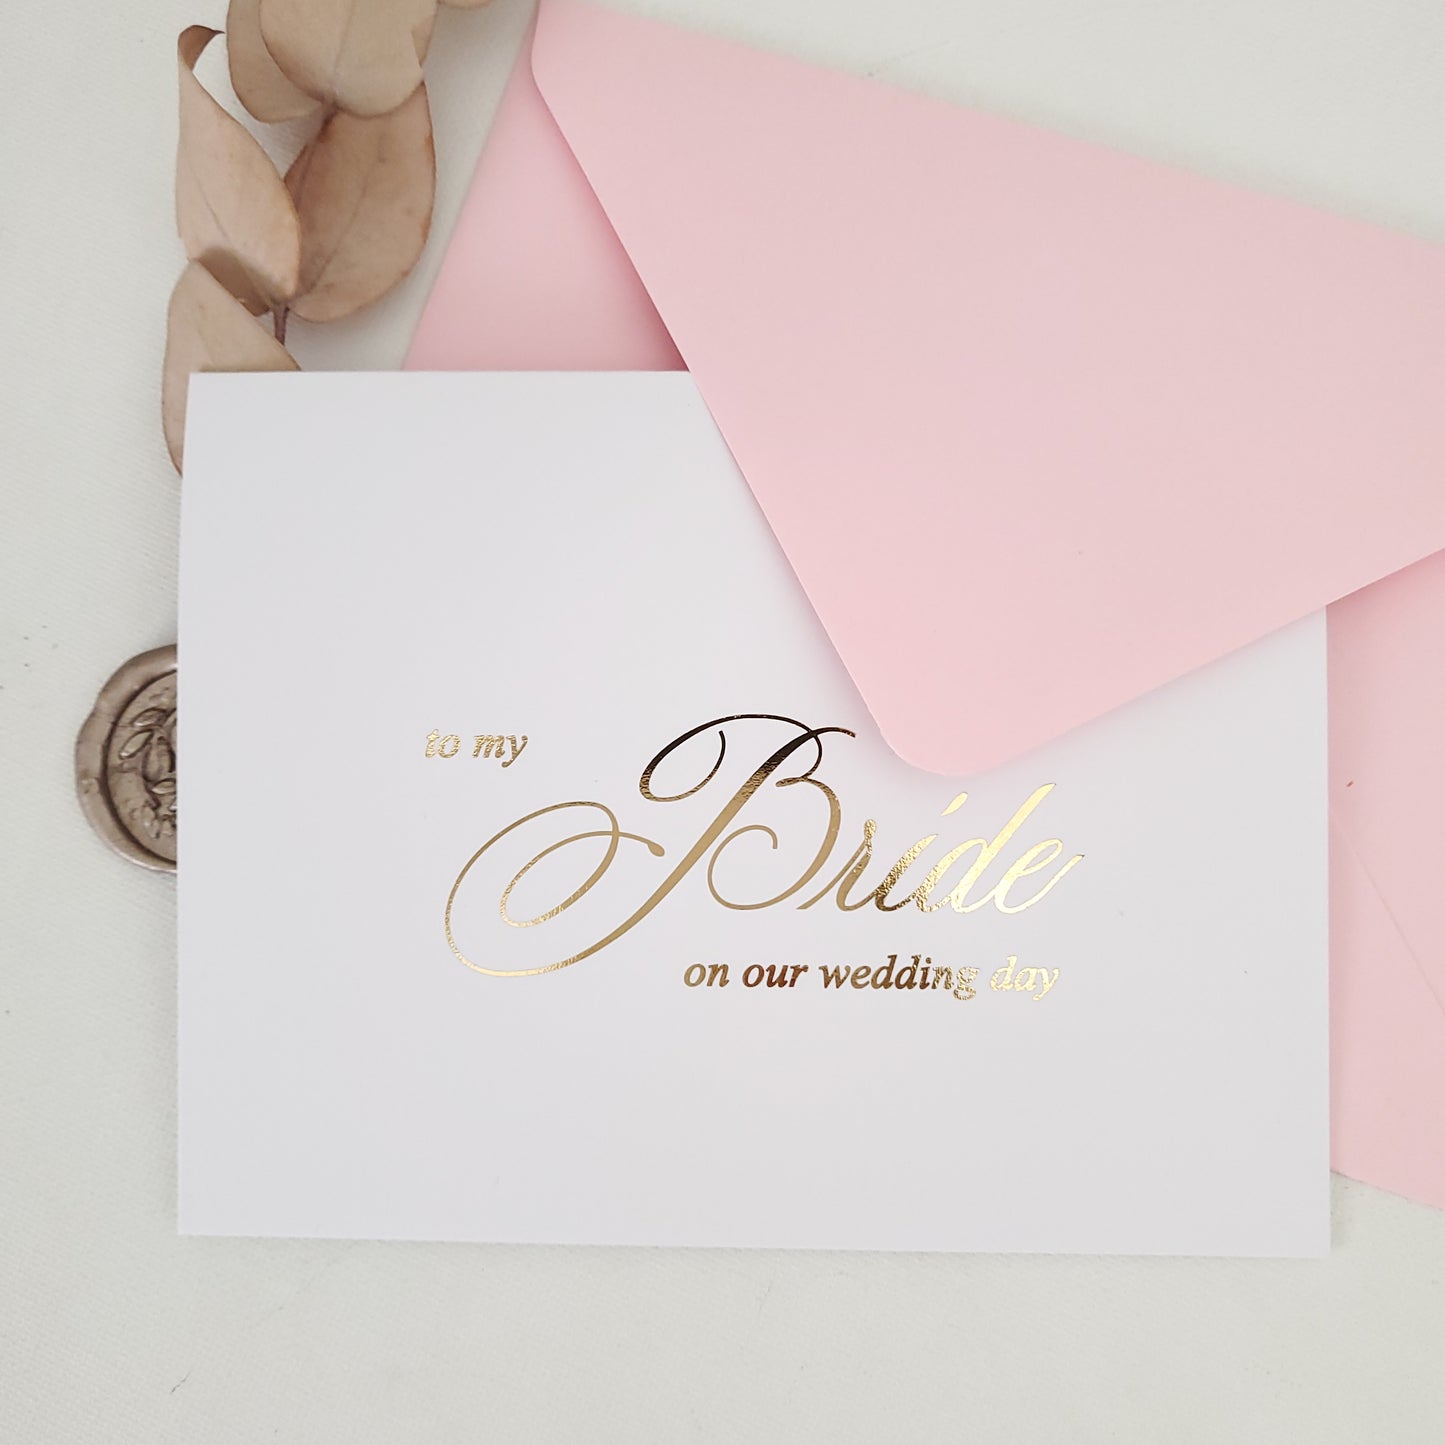 gold foiled to my bride on my wedding day note card - XOXOKristen